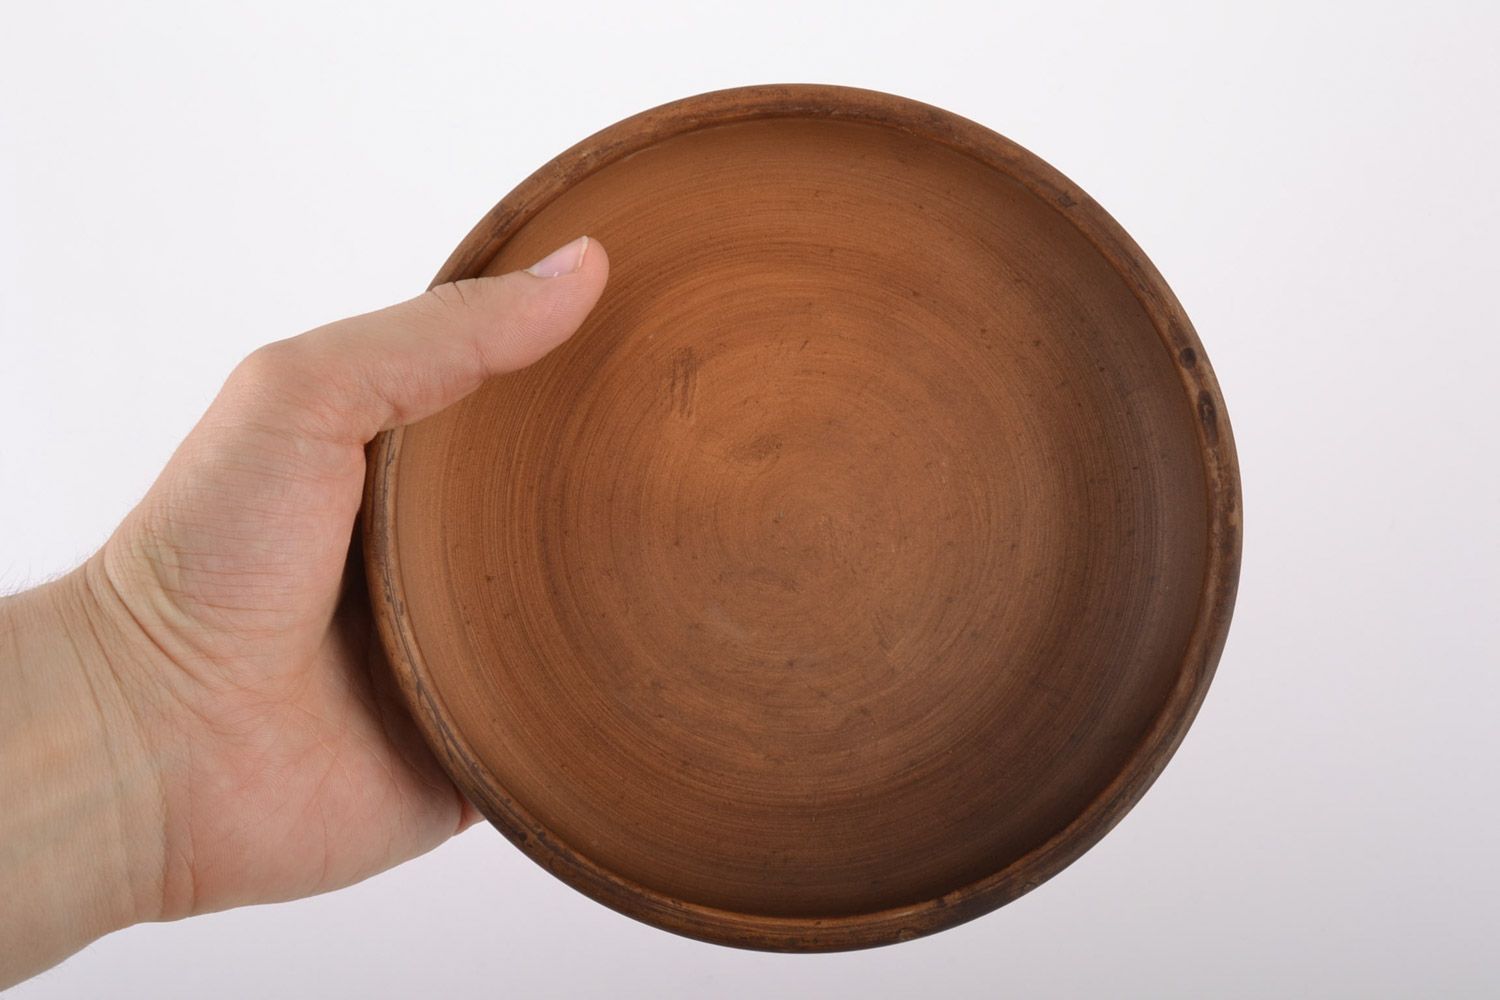 7 6 oz lead-free natural earth clay bowl platter great décor gift 1 lb photo 3